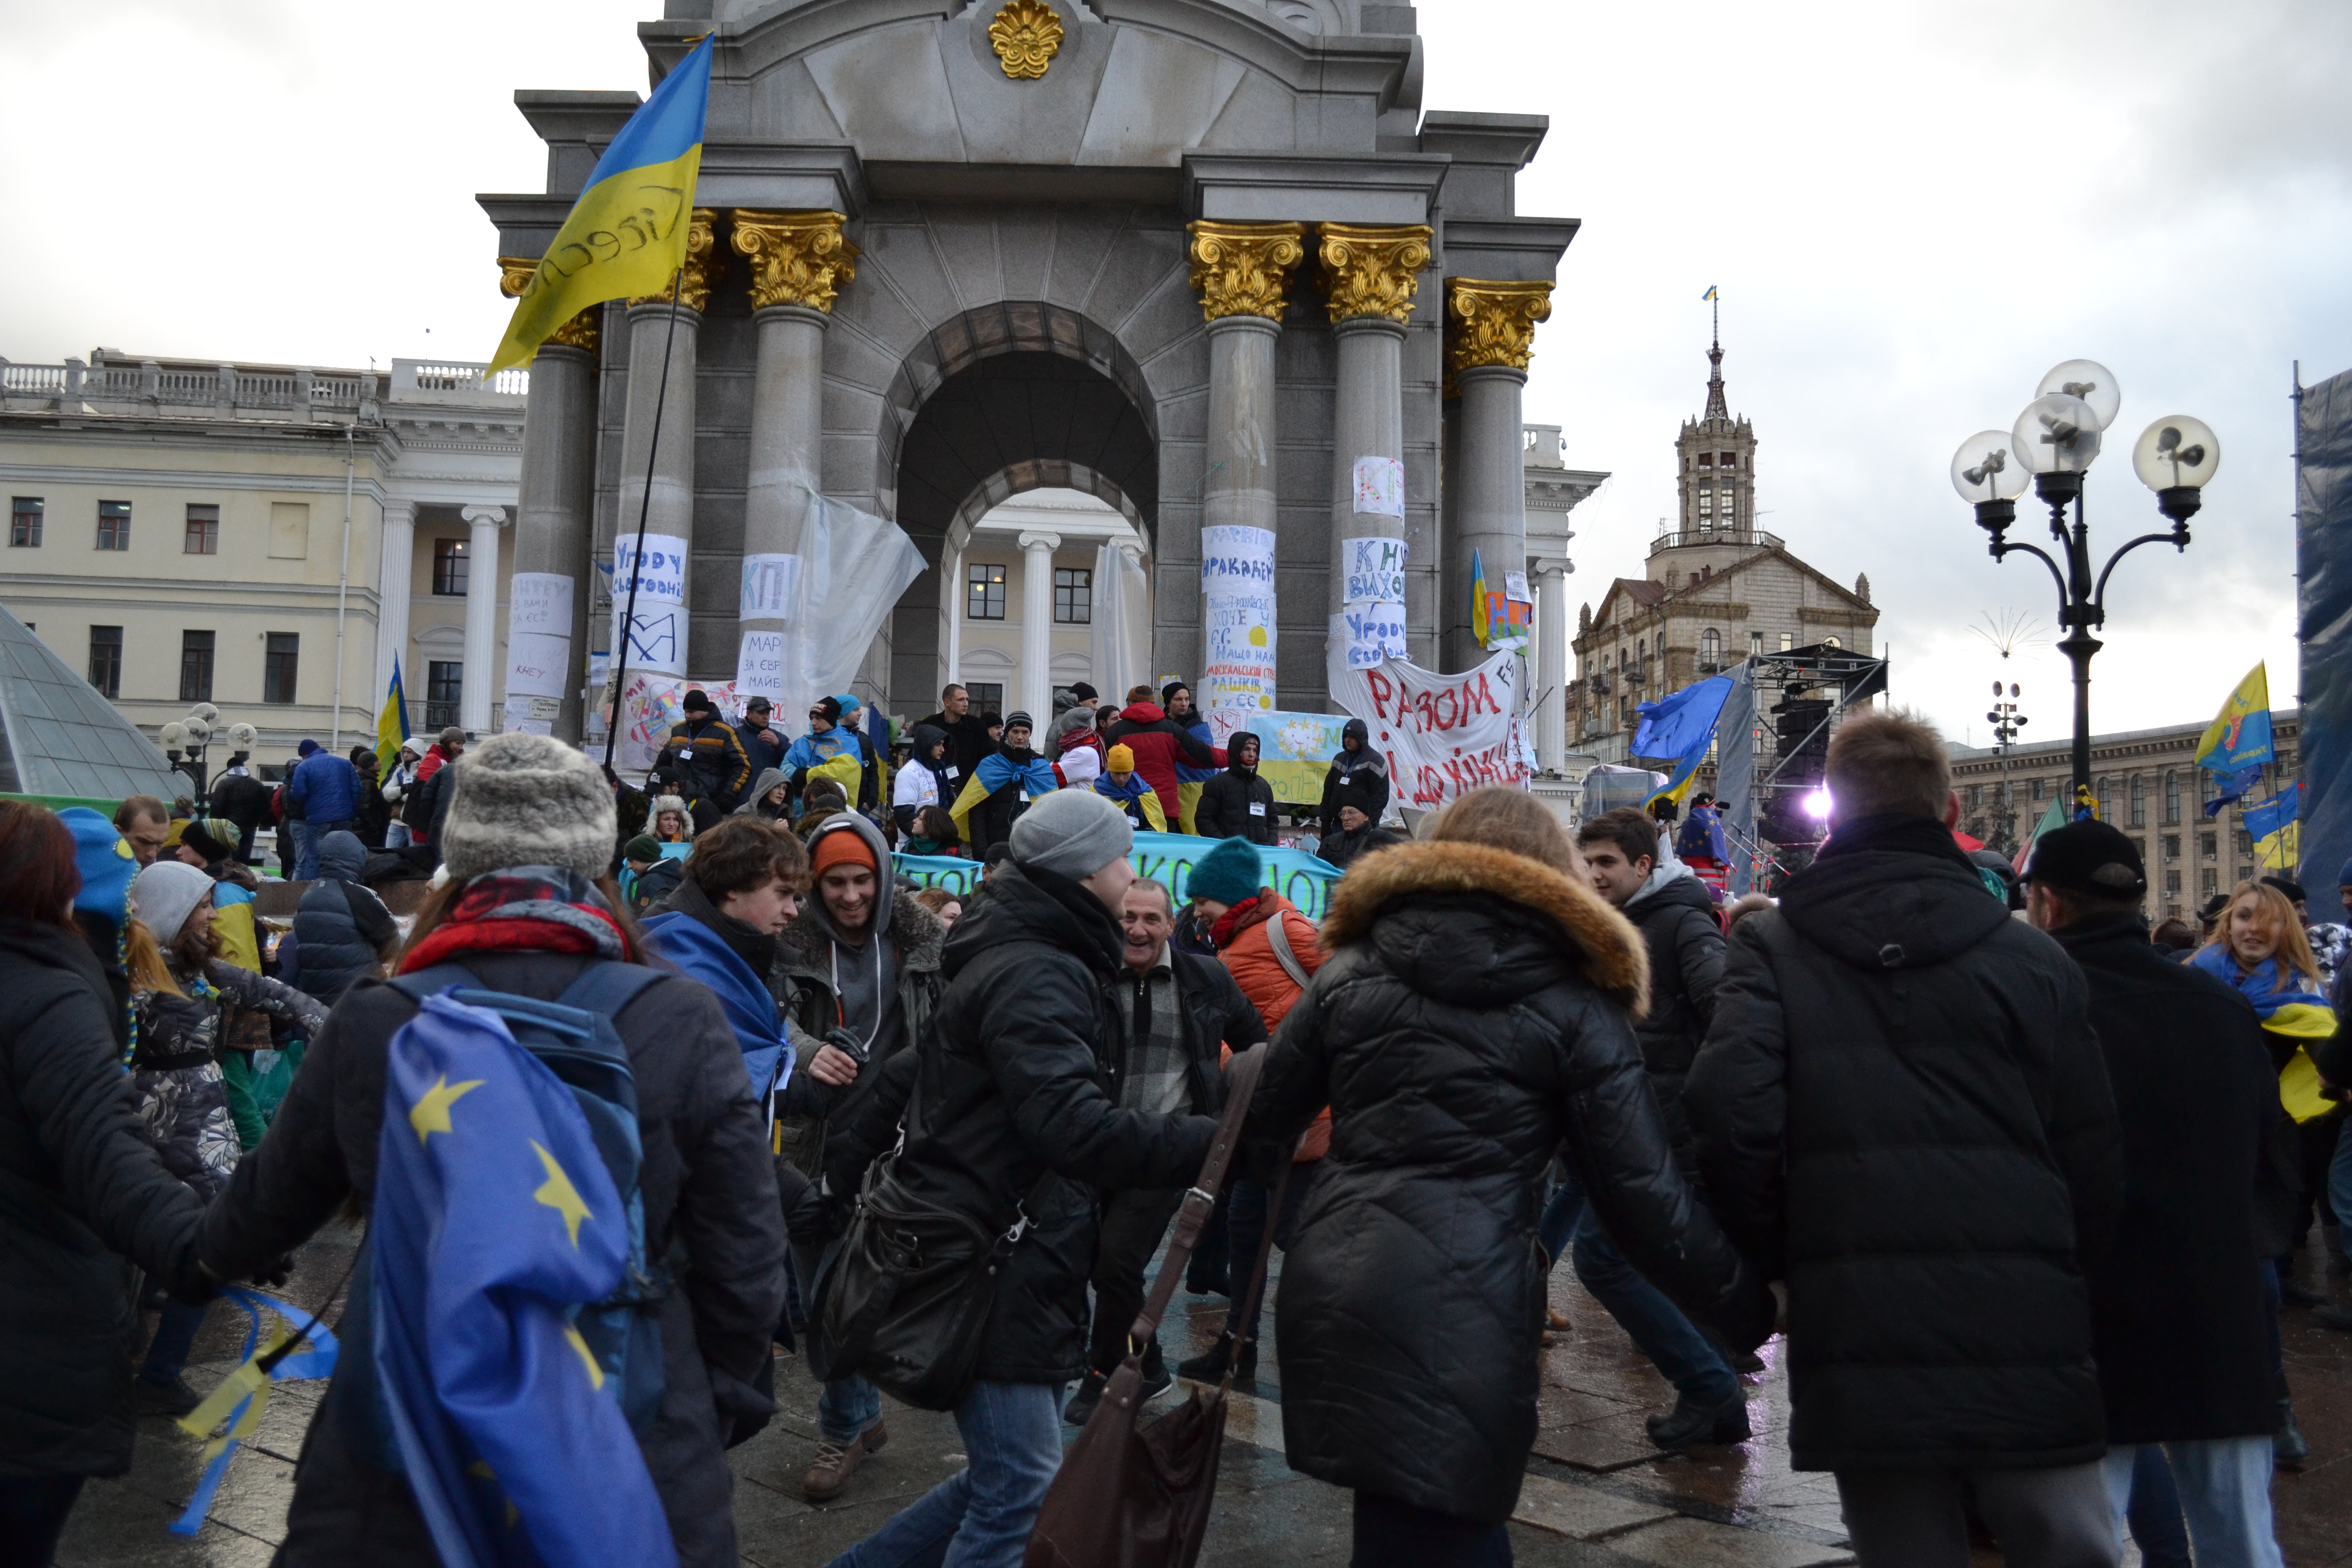 November 29, 2013 on Maidan: The mood was upbeat, but just days later, students on the square would be beaten and arrested by the riot police.